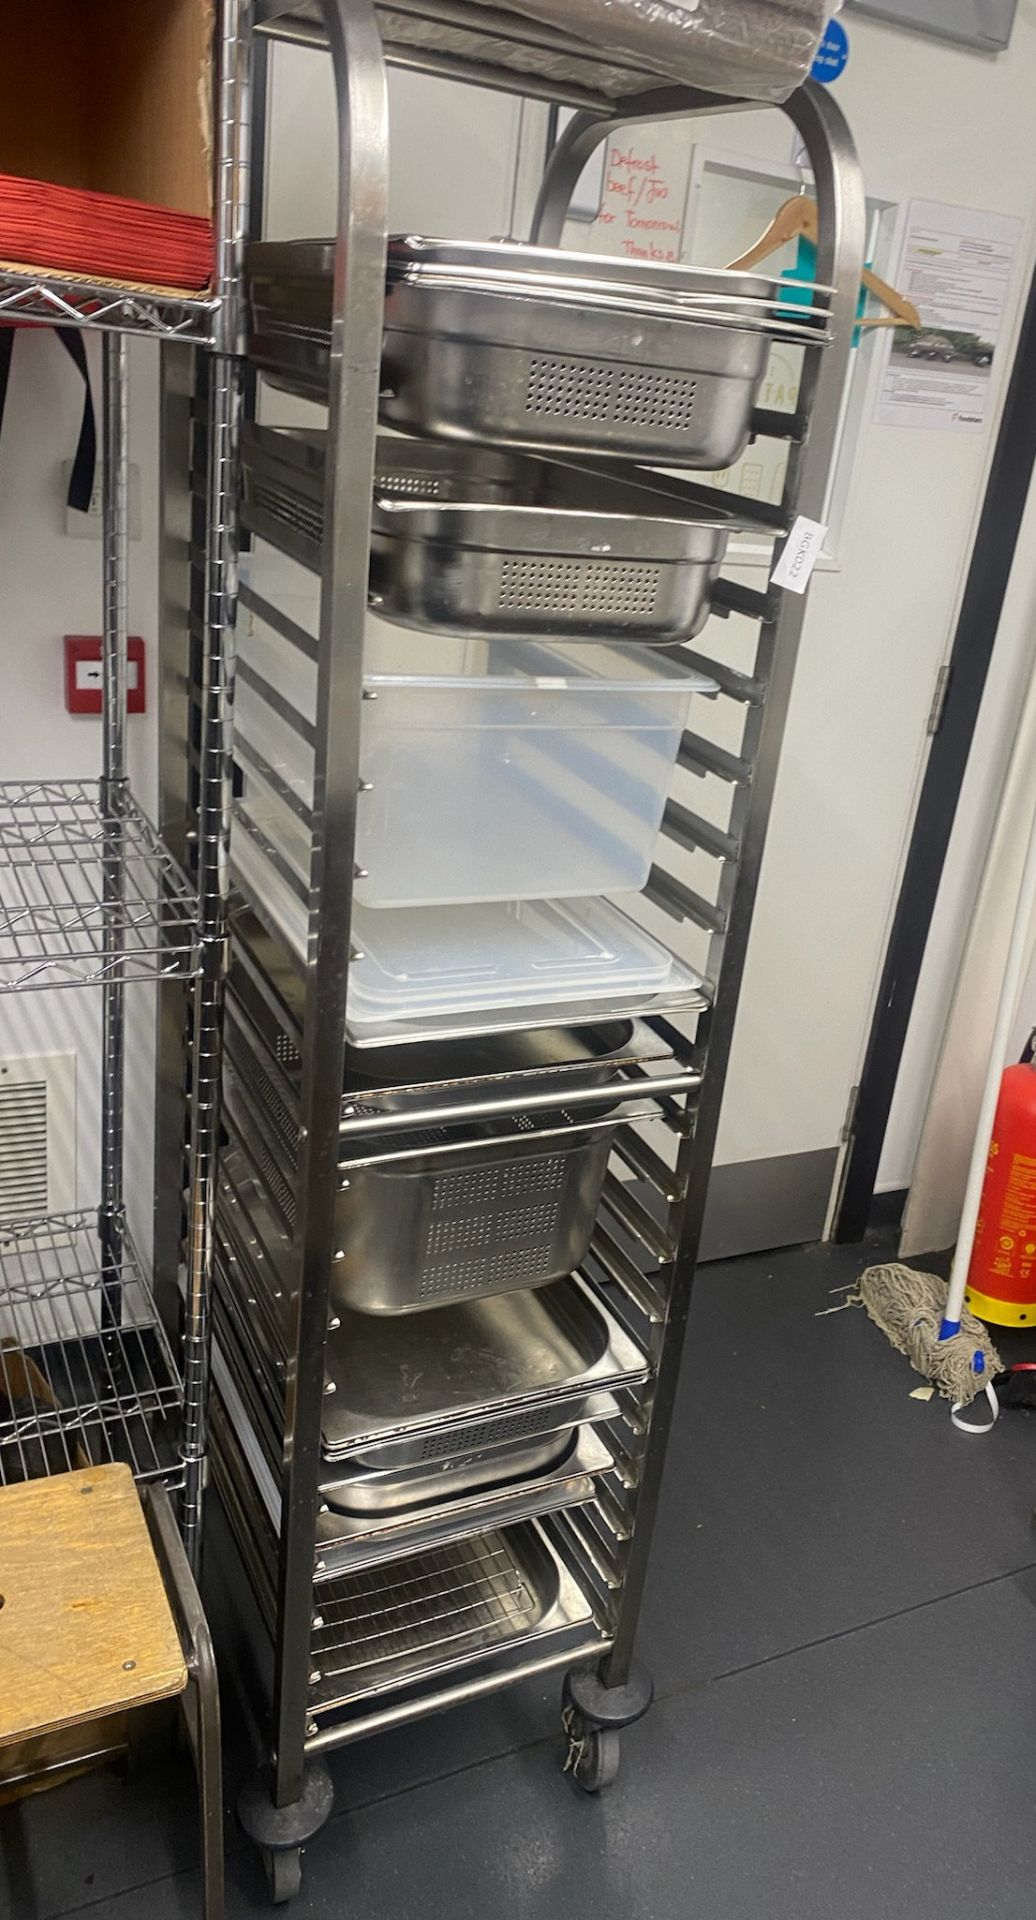 1 x Rack/Tray Trolley - Includes Trays/Pans As Shown - Ref: BGK022 - CL806 - Kentish Town,